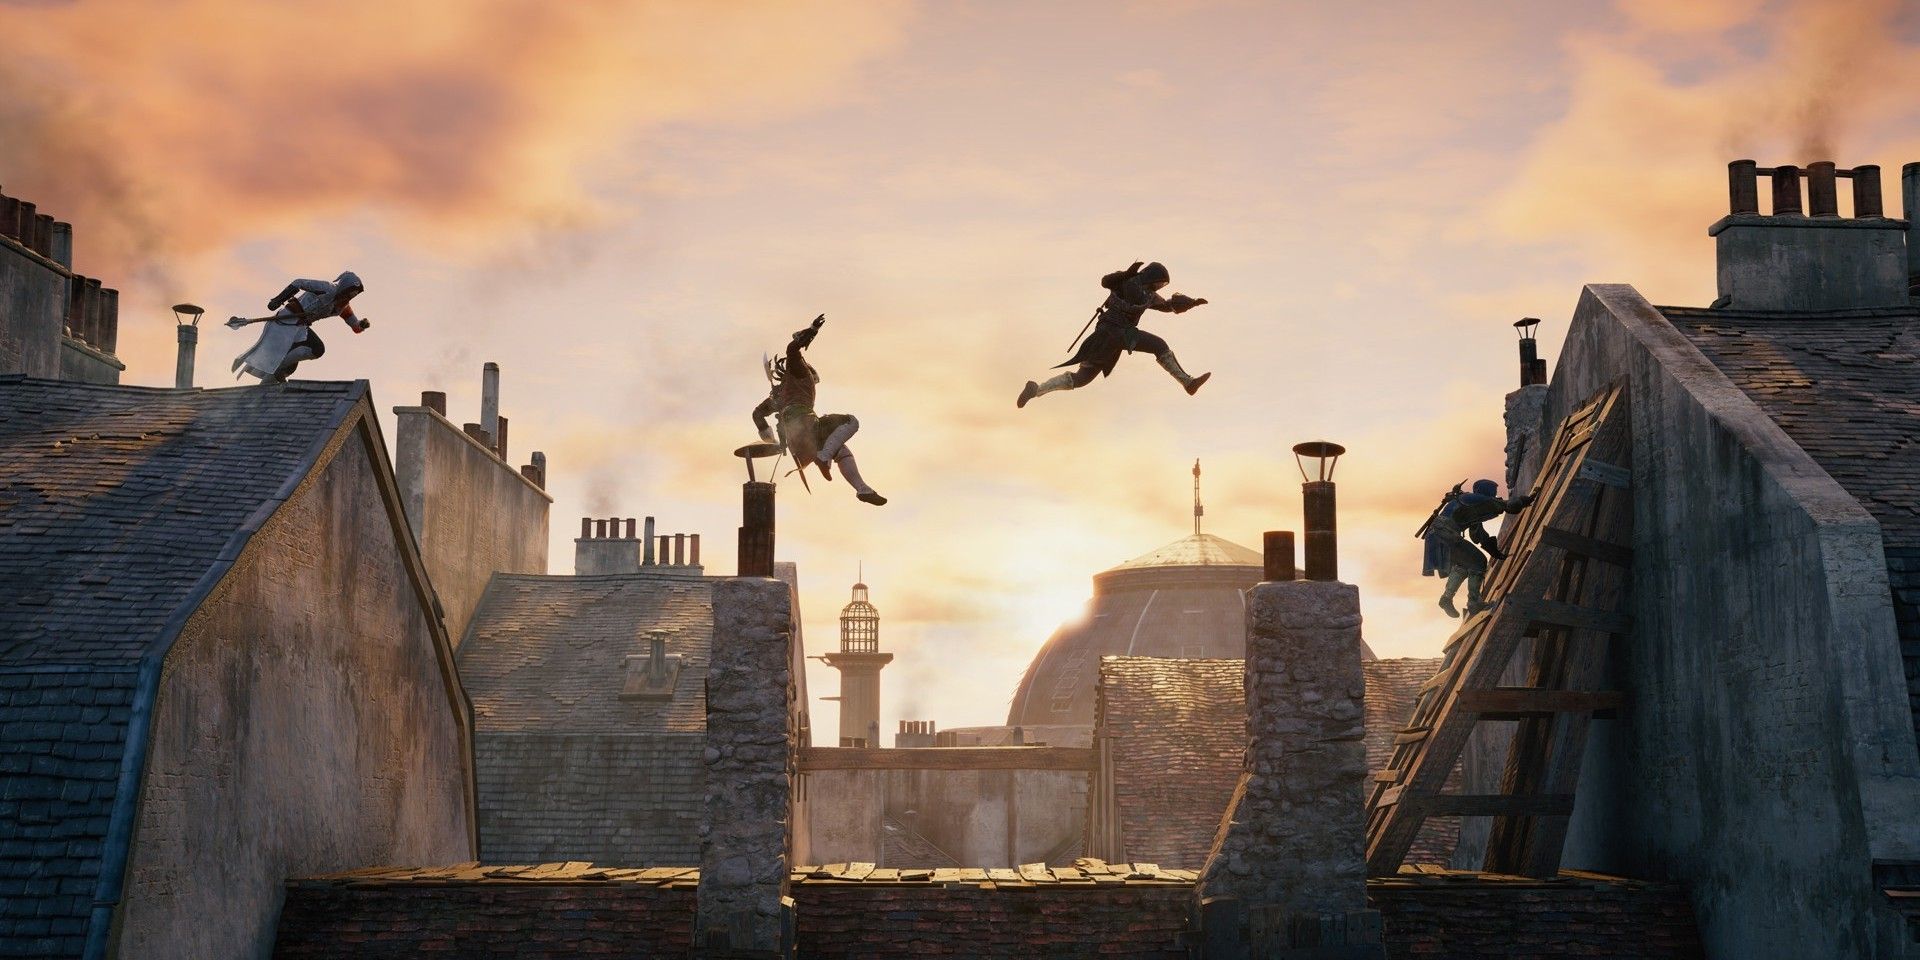 Assassin's creed 1 parkour is clunky and bori-  : r/assassinscreed